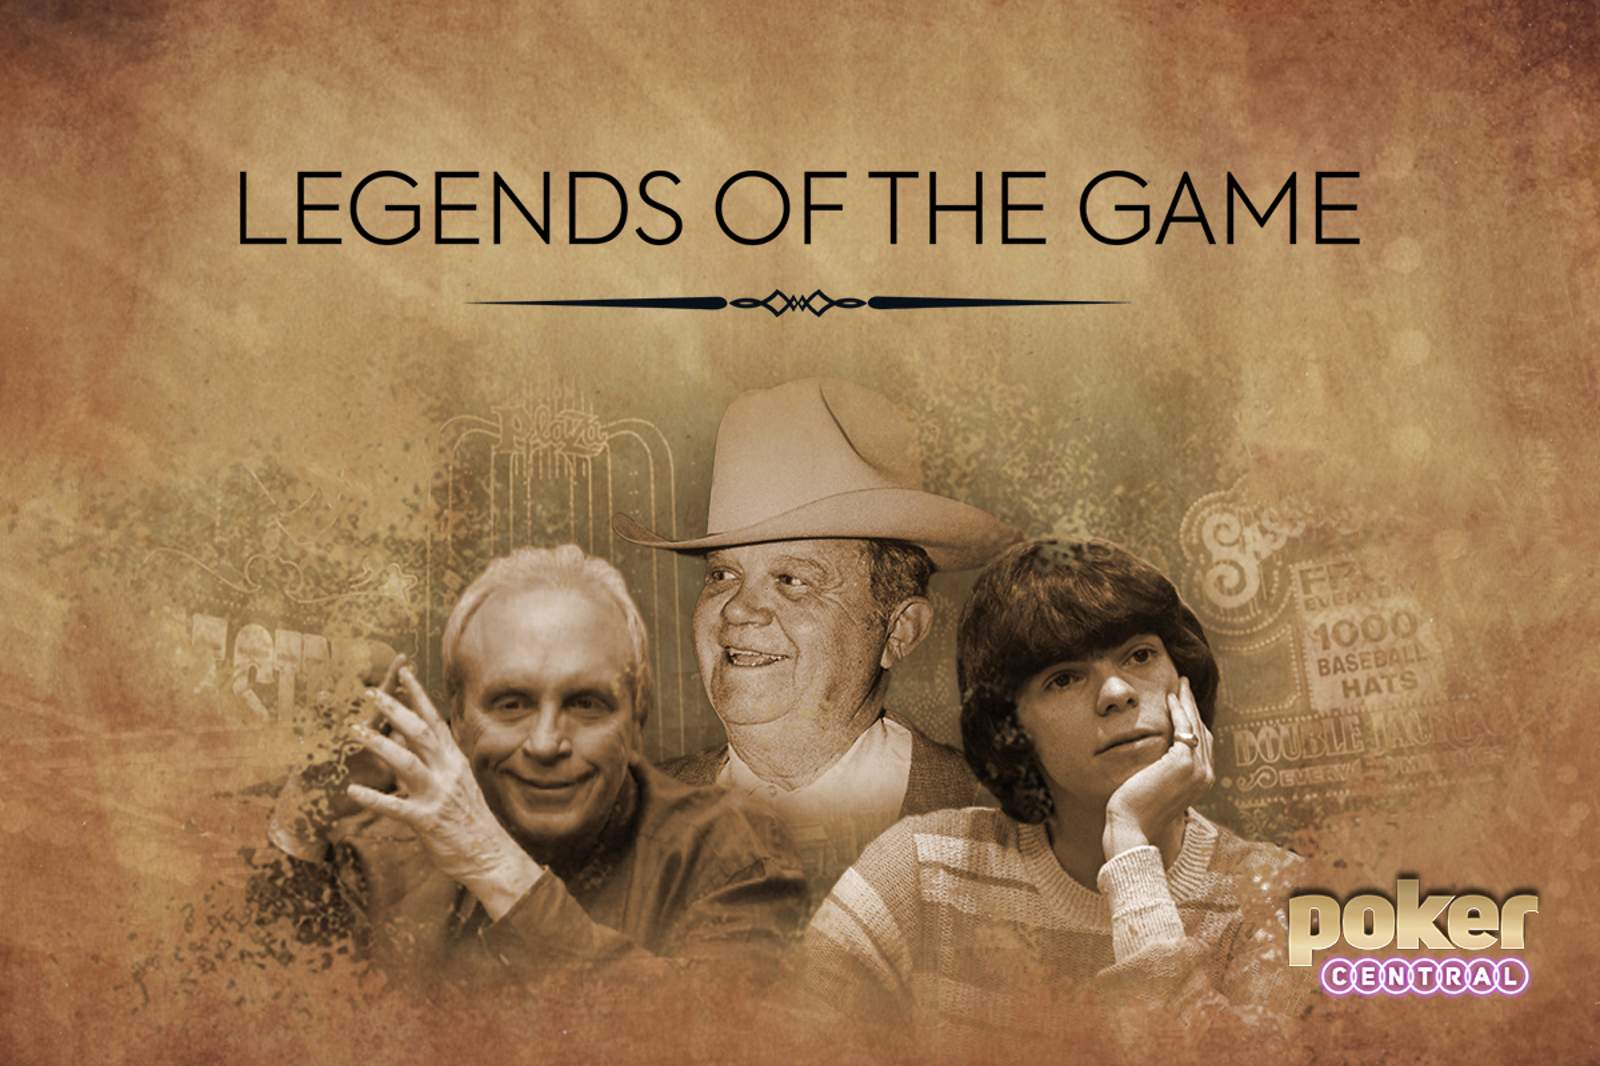 "Legends of the Game" Docuseries Goes All-in on Gaming and Poker Icons